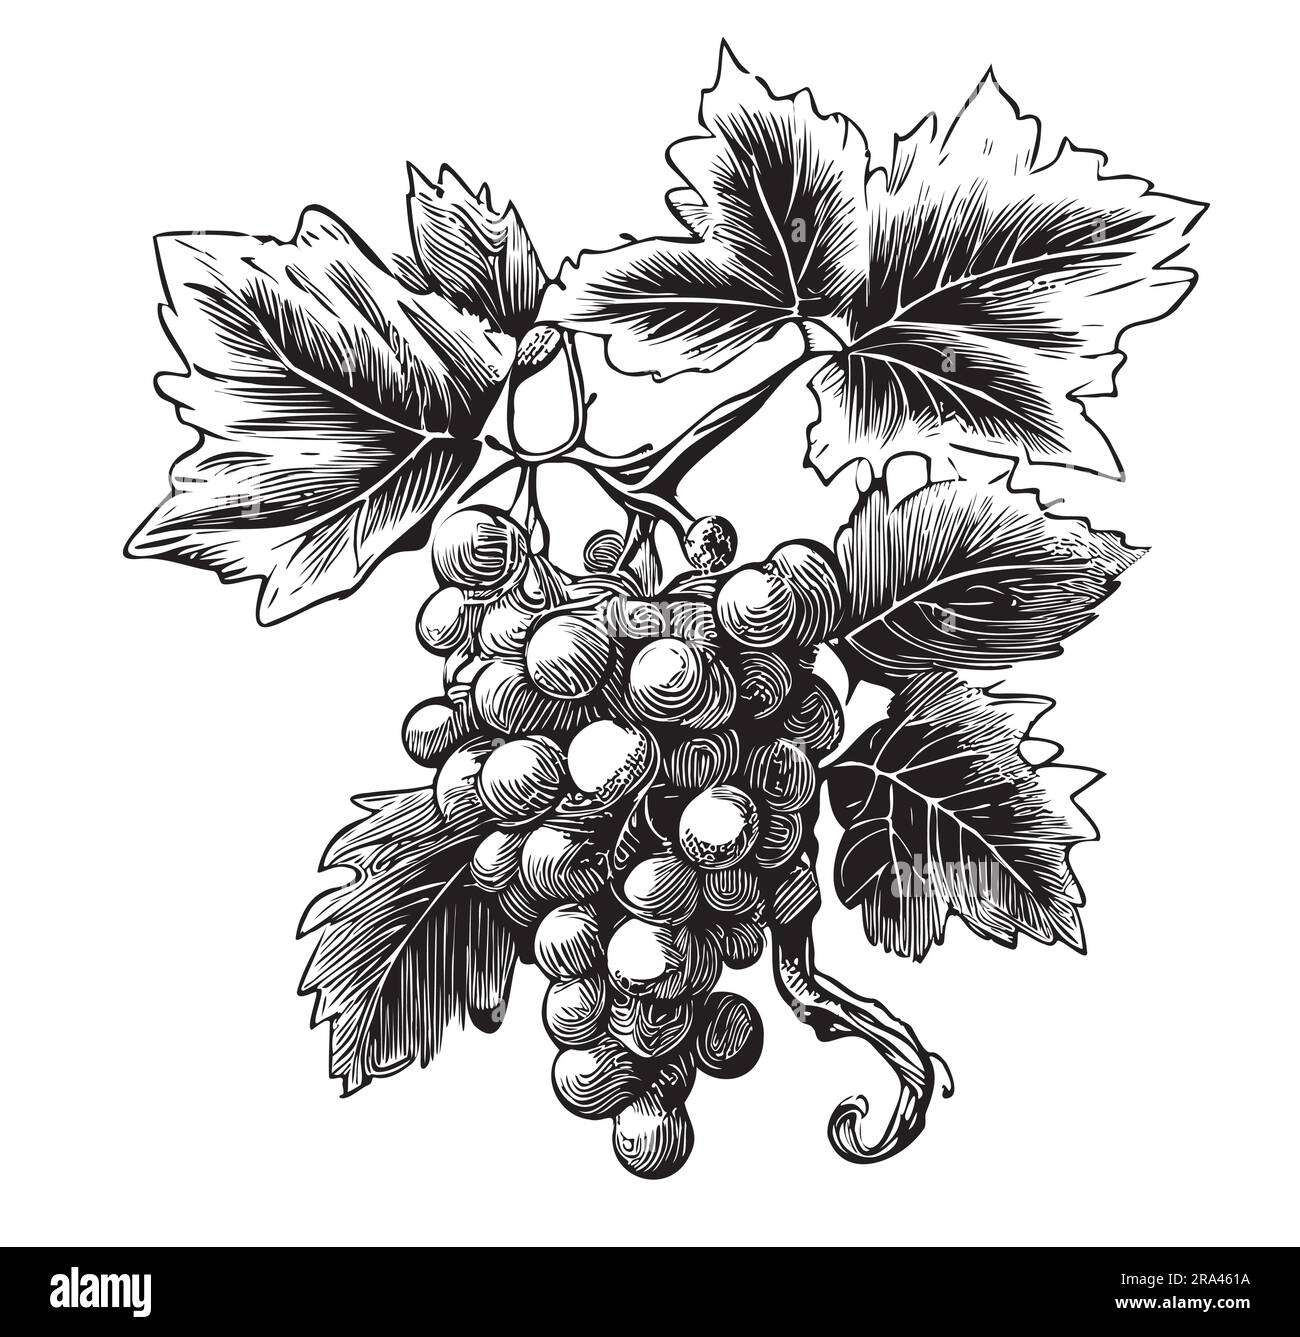 Bunch of grapes hand drawn sketch in doodle style Berries illustration Stock Vector